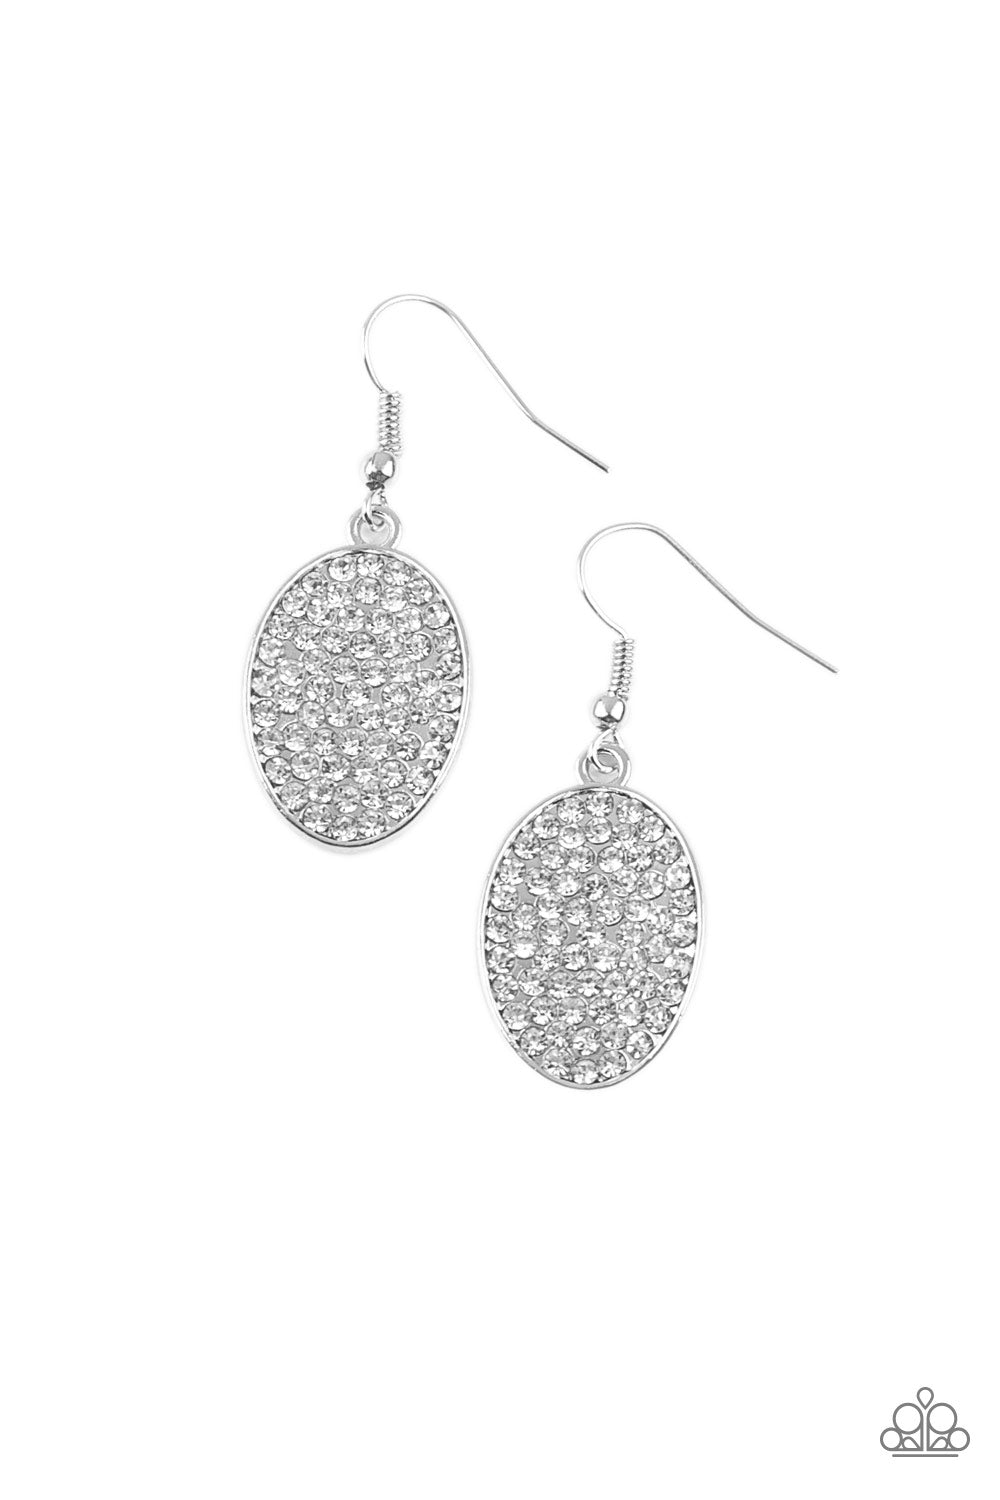 Paparazzi Accessories All Dazzle - White Earrings 